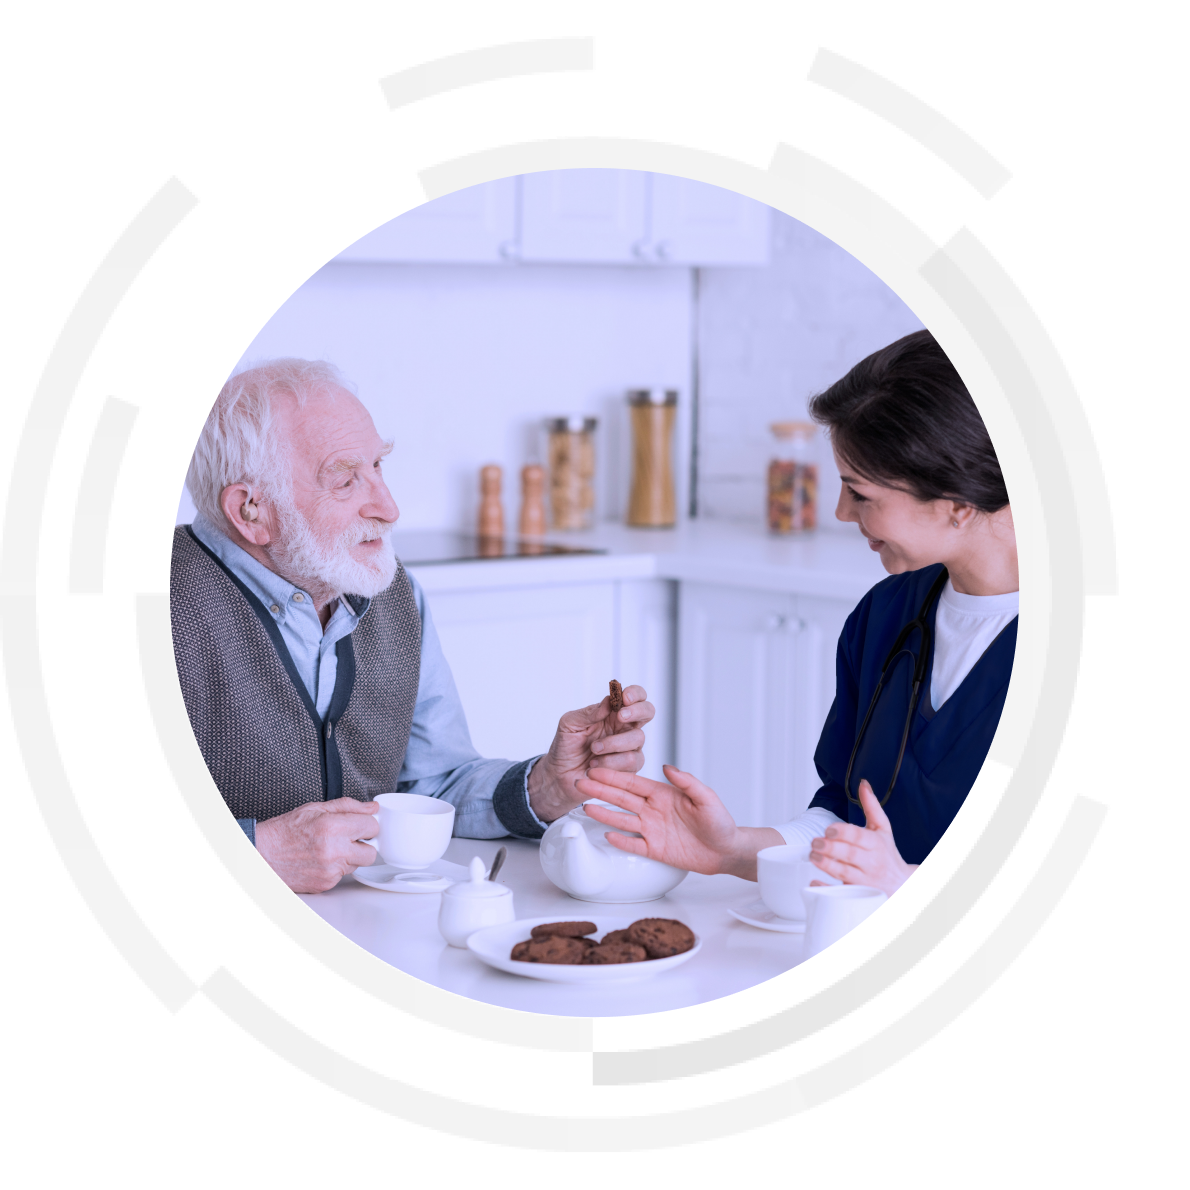 Elderly patient and nurse sitting at dining table sharing tea and biscuits.